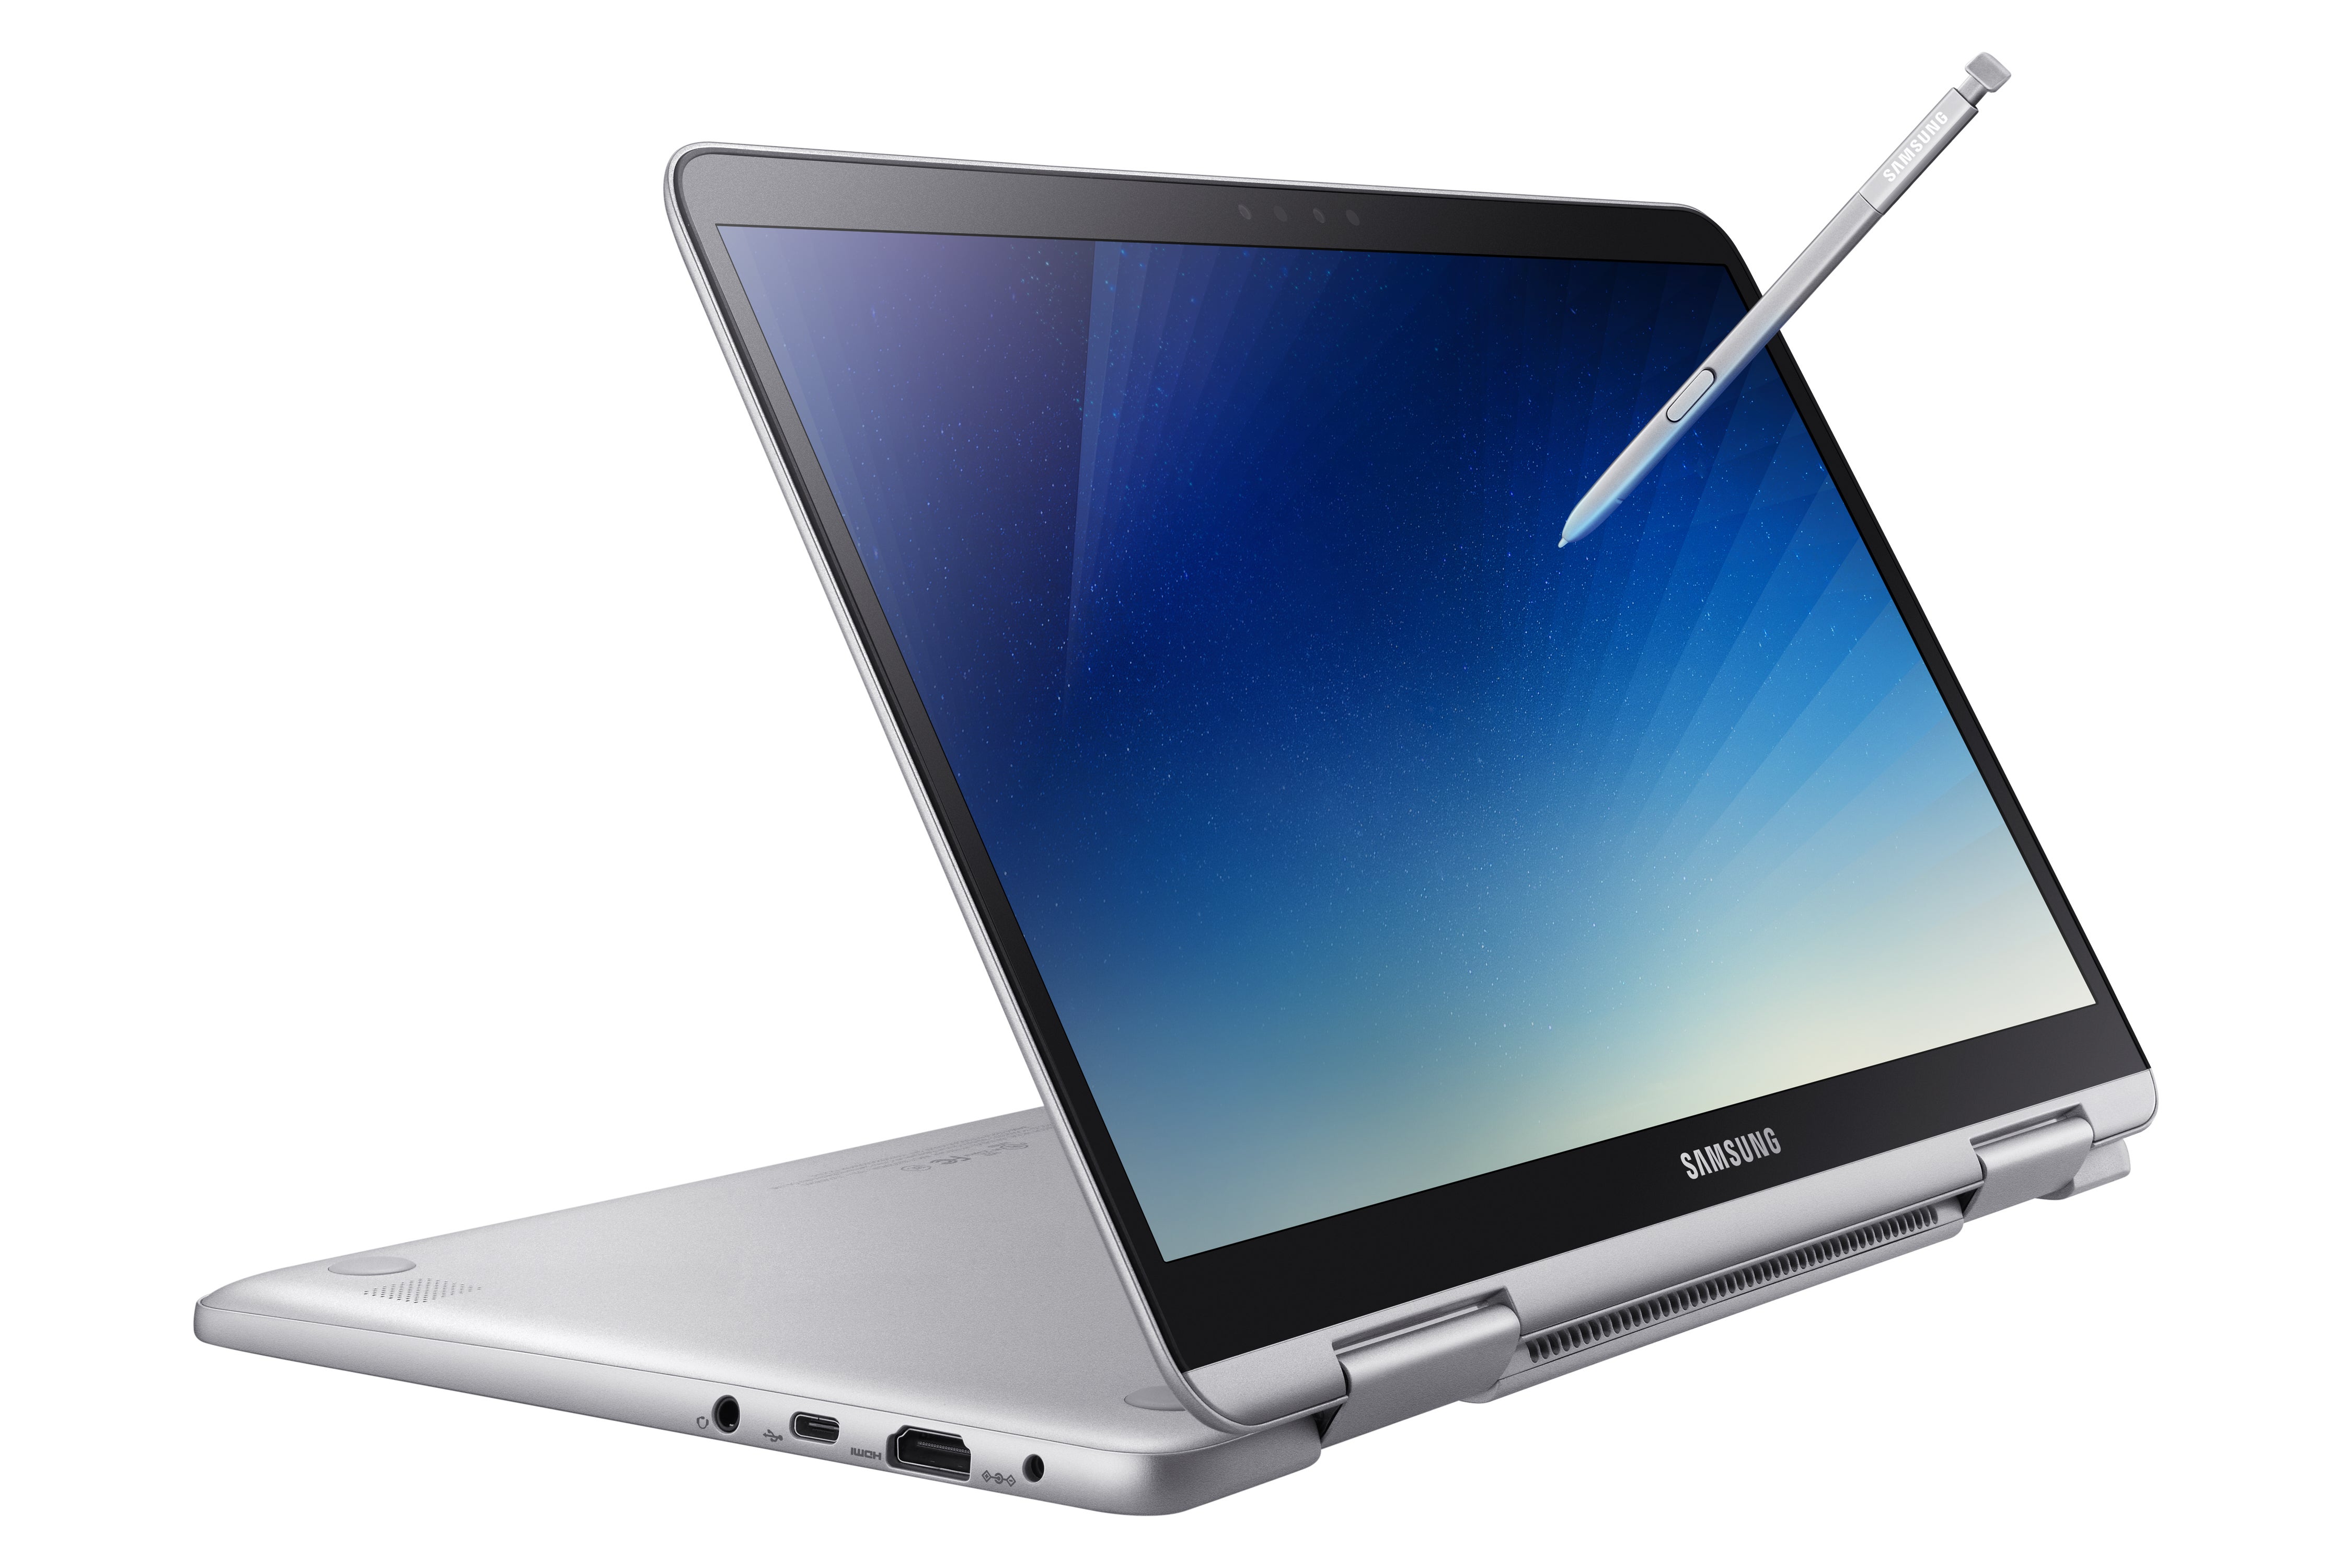 Samsung Notebook 9 Pen in tent mode with S Pen